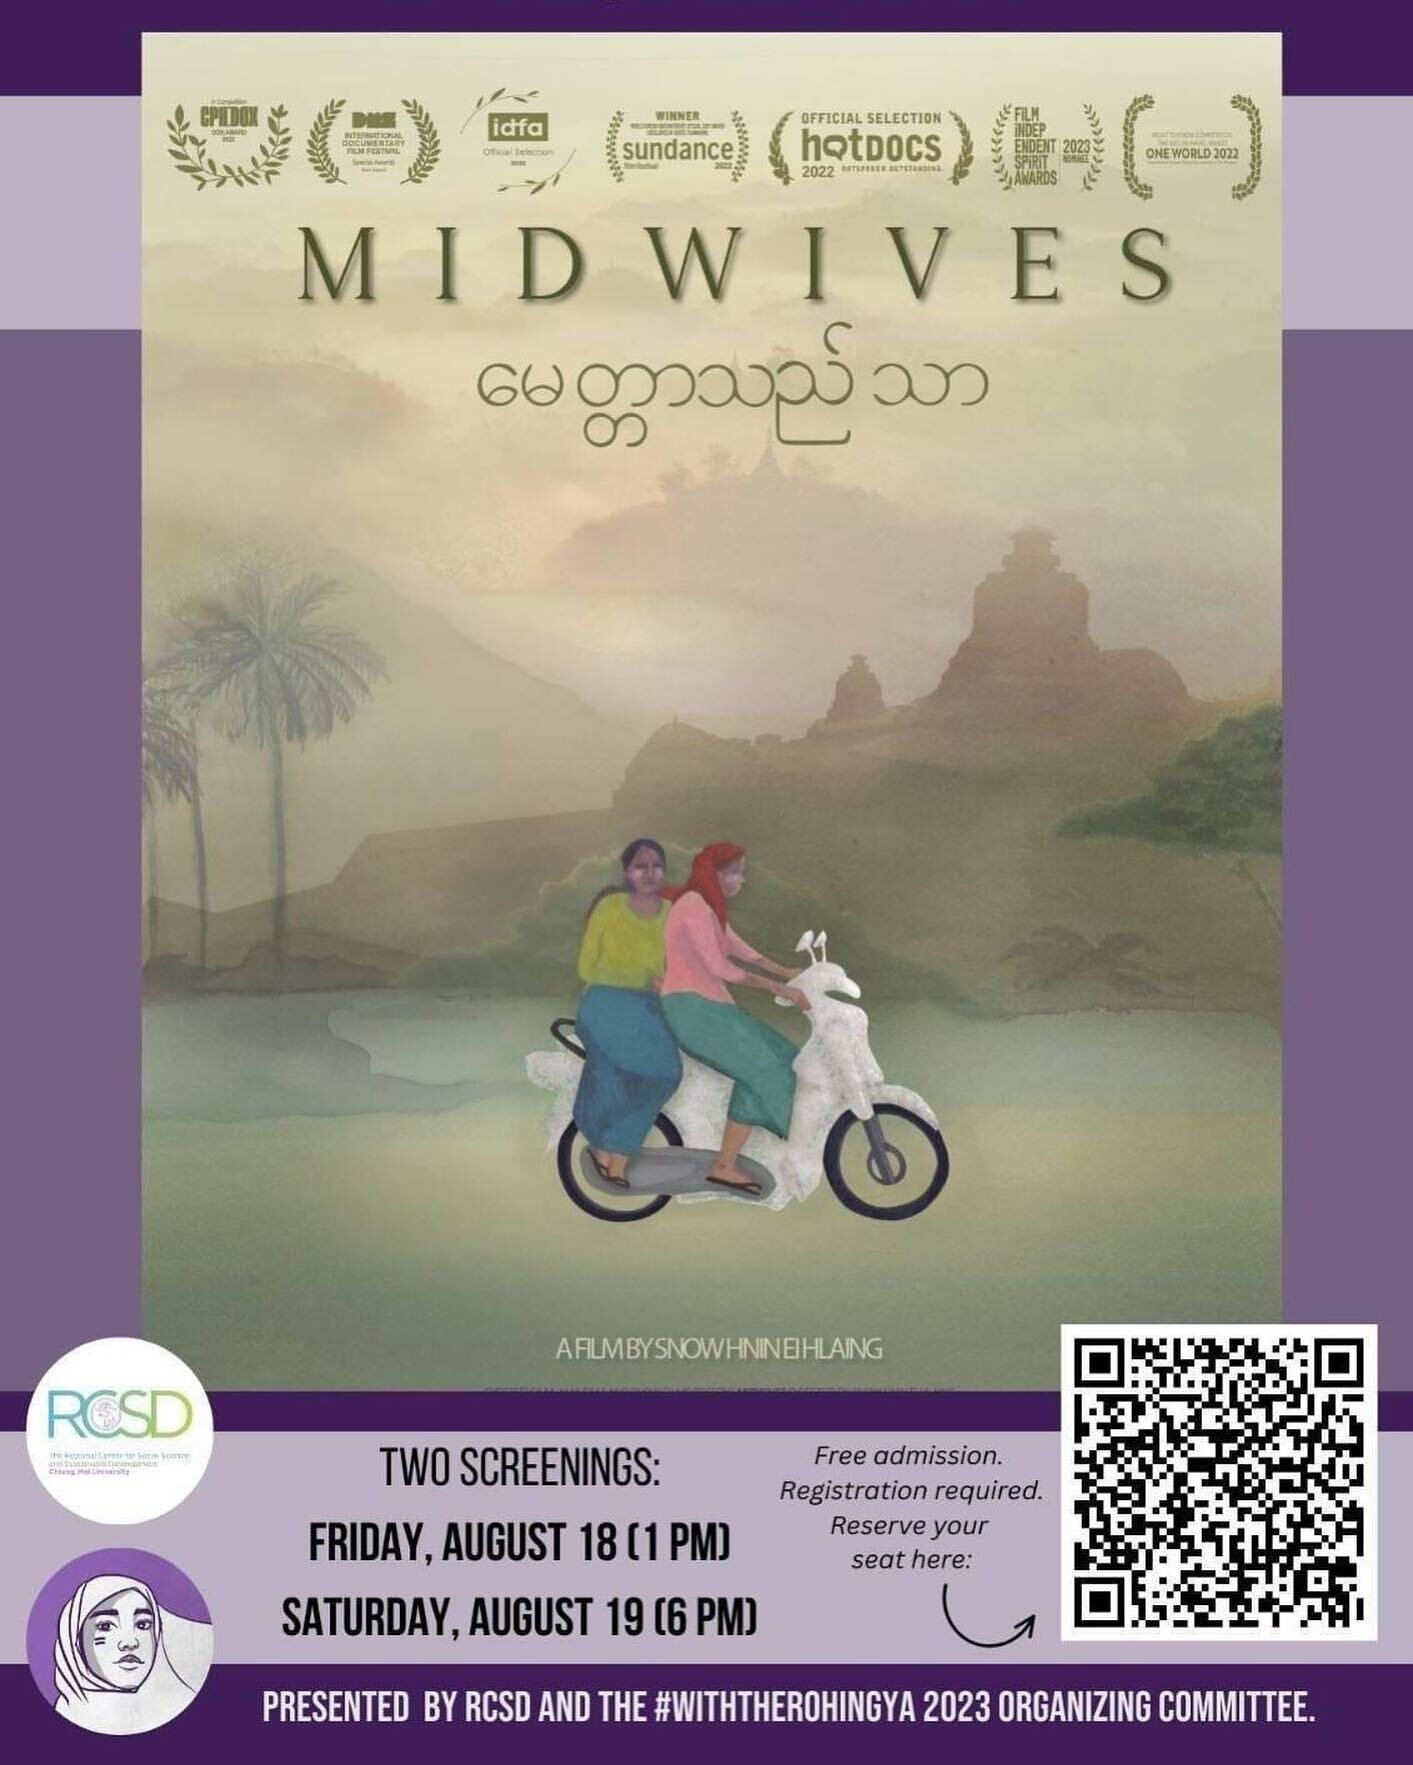 Friends in Chiang Mai,

This August, we are hosting two screenings of the award-winning documentary film, Midwives. 

Directed by Snow Hnin Ei Hlaing. The film screenings will be followed by a Q and A with Snow Hnin Ei Hlaing, the film director, and 